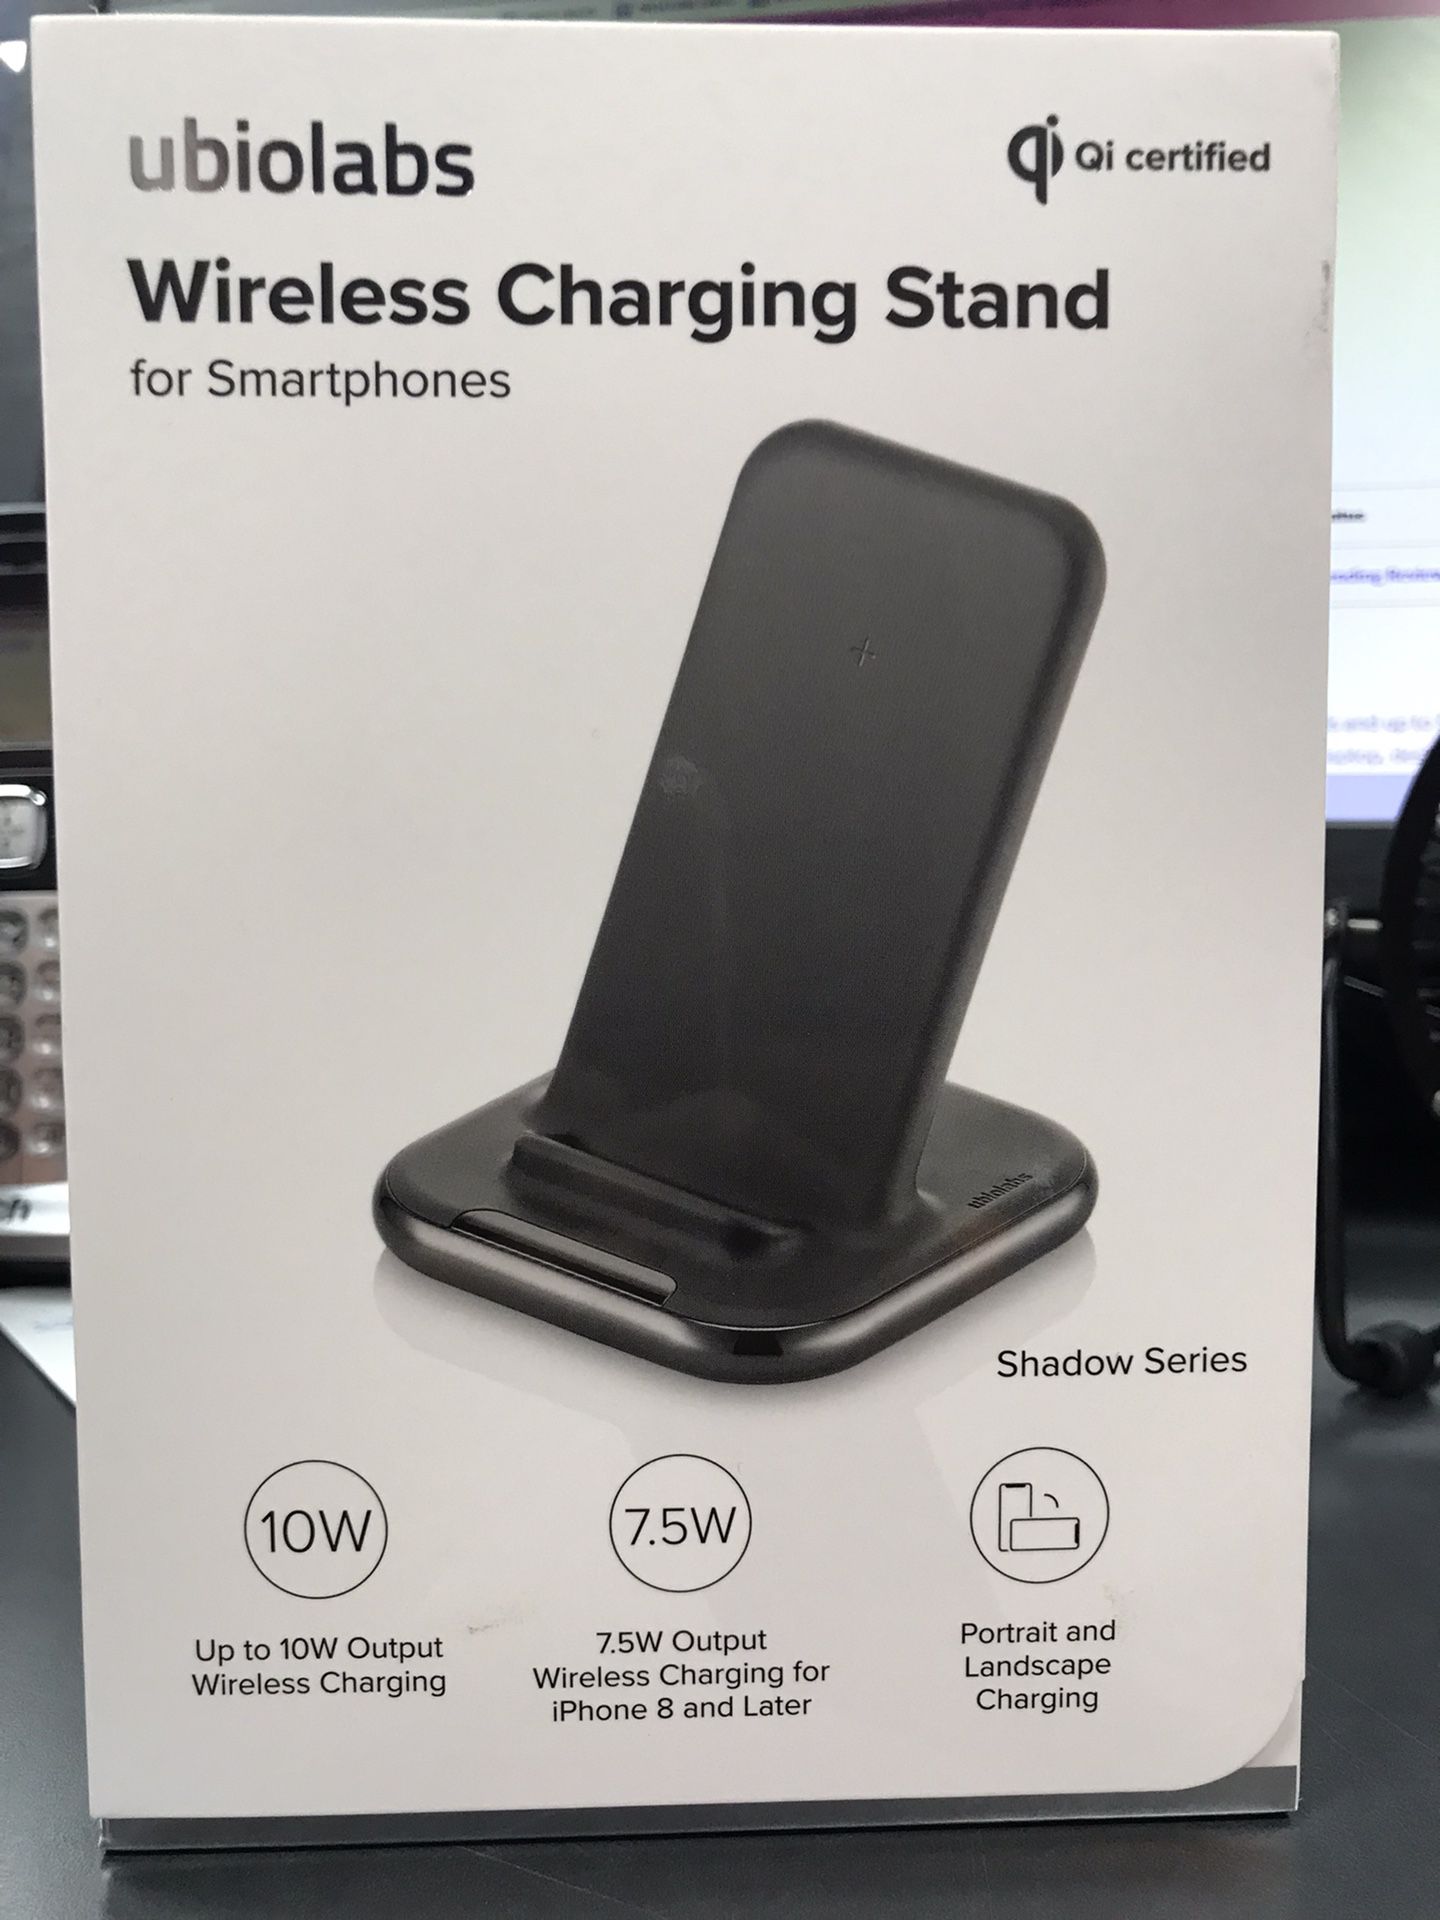 ubiolabs Wireless Charging Stand